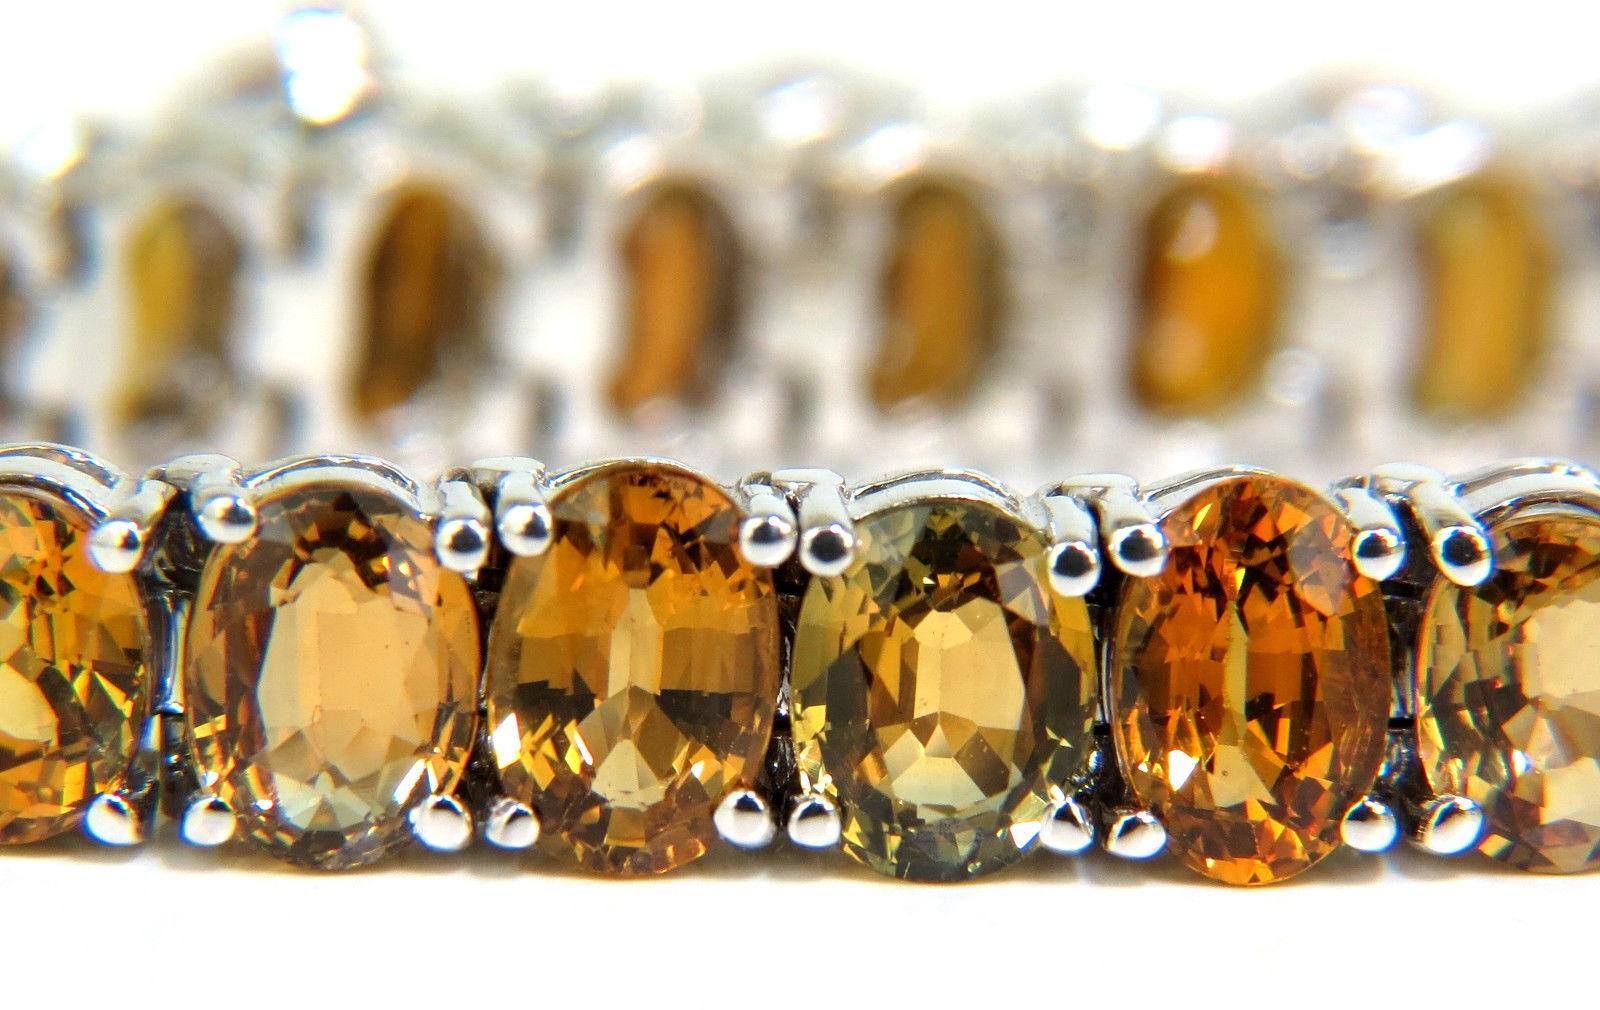 Rare 26.00ct. Natural Sapphires 

 Orange - yellow - brown colors

Clean Gem clarity

Excellent range of colors

no two are alike!

38 sapphires in total

Average 6.2 X 4.5mm

Full cuts

7 inches long

14kt white gold

$5200 appraisal will accompany 